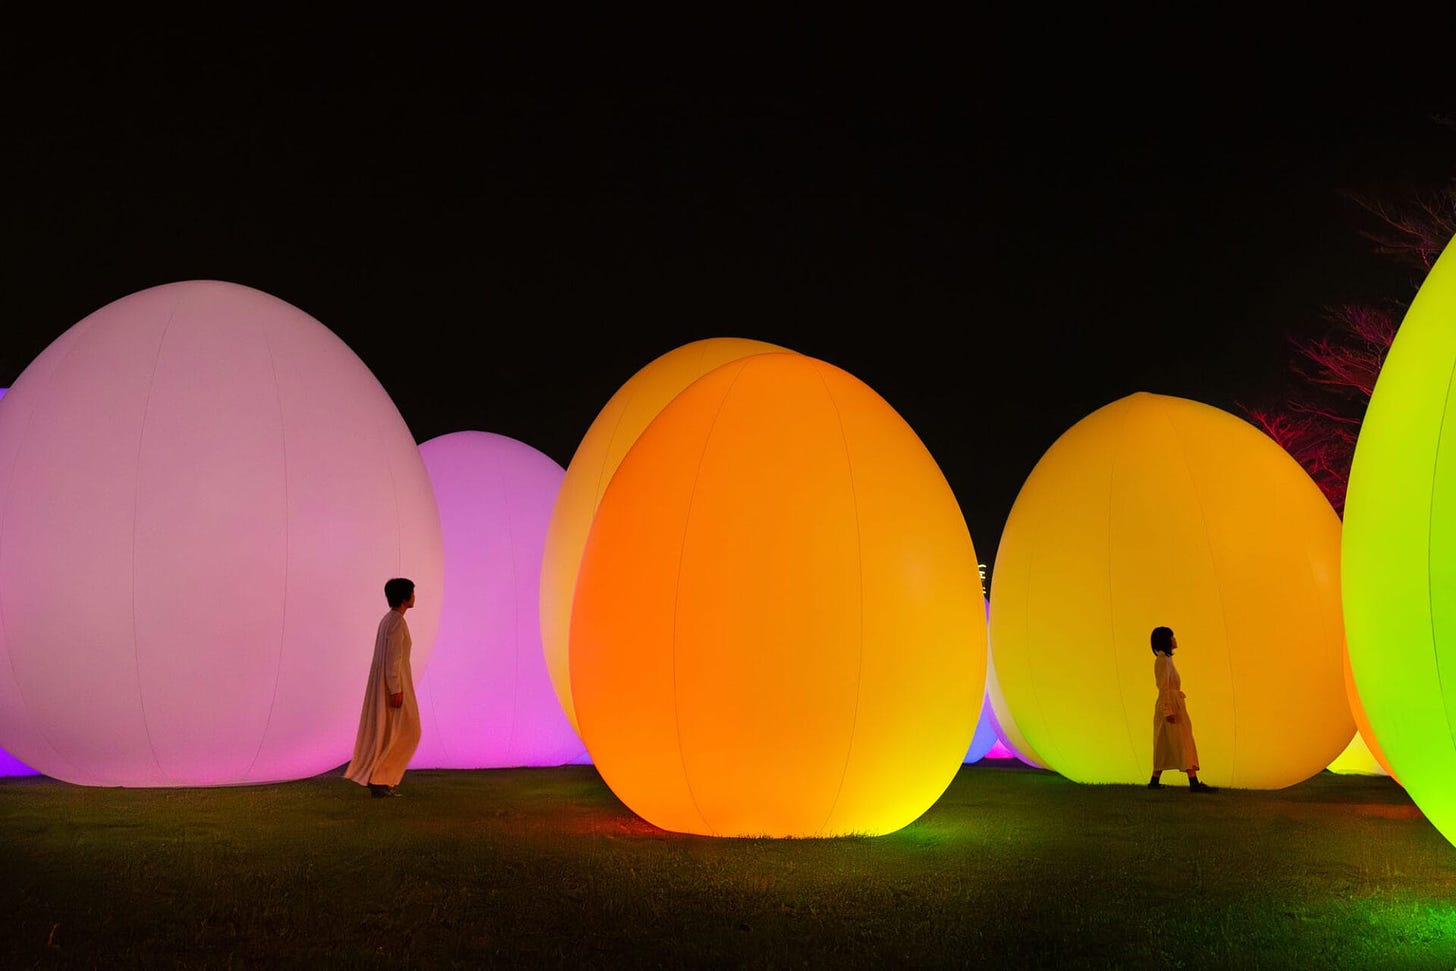 Glowing orange, pink, and light green ovoid forms. They tower in height compared to the humans standing next to them.